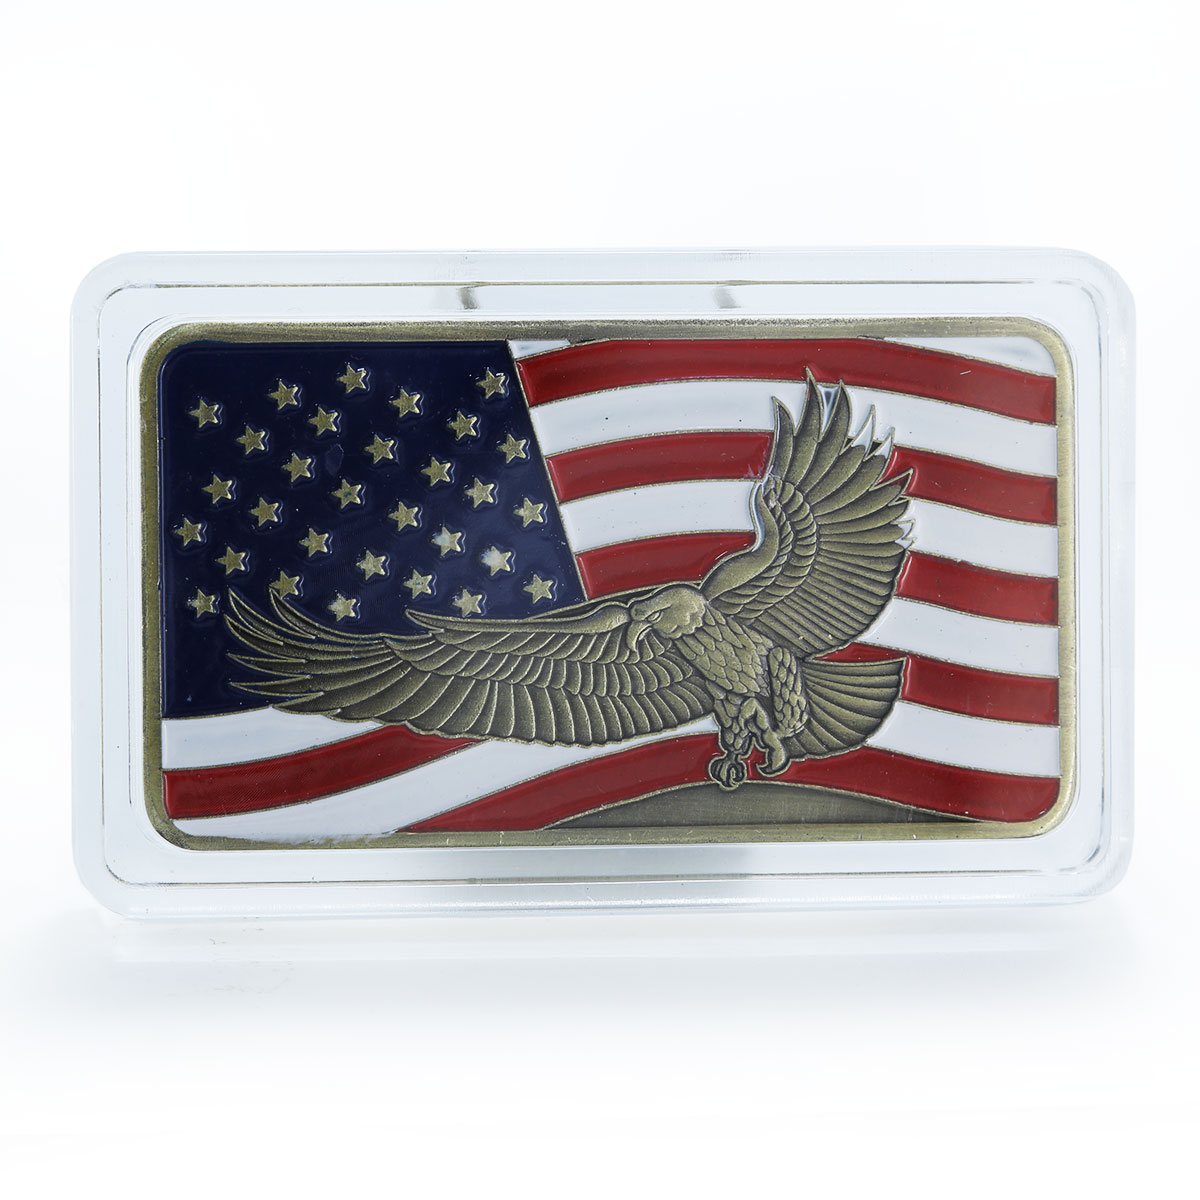 USA Ohio, Patriot Guard, Standing with Honor, Dignity and Respect, Eagle token